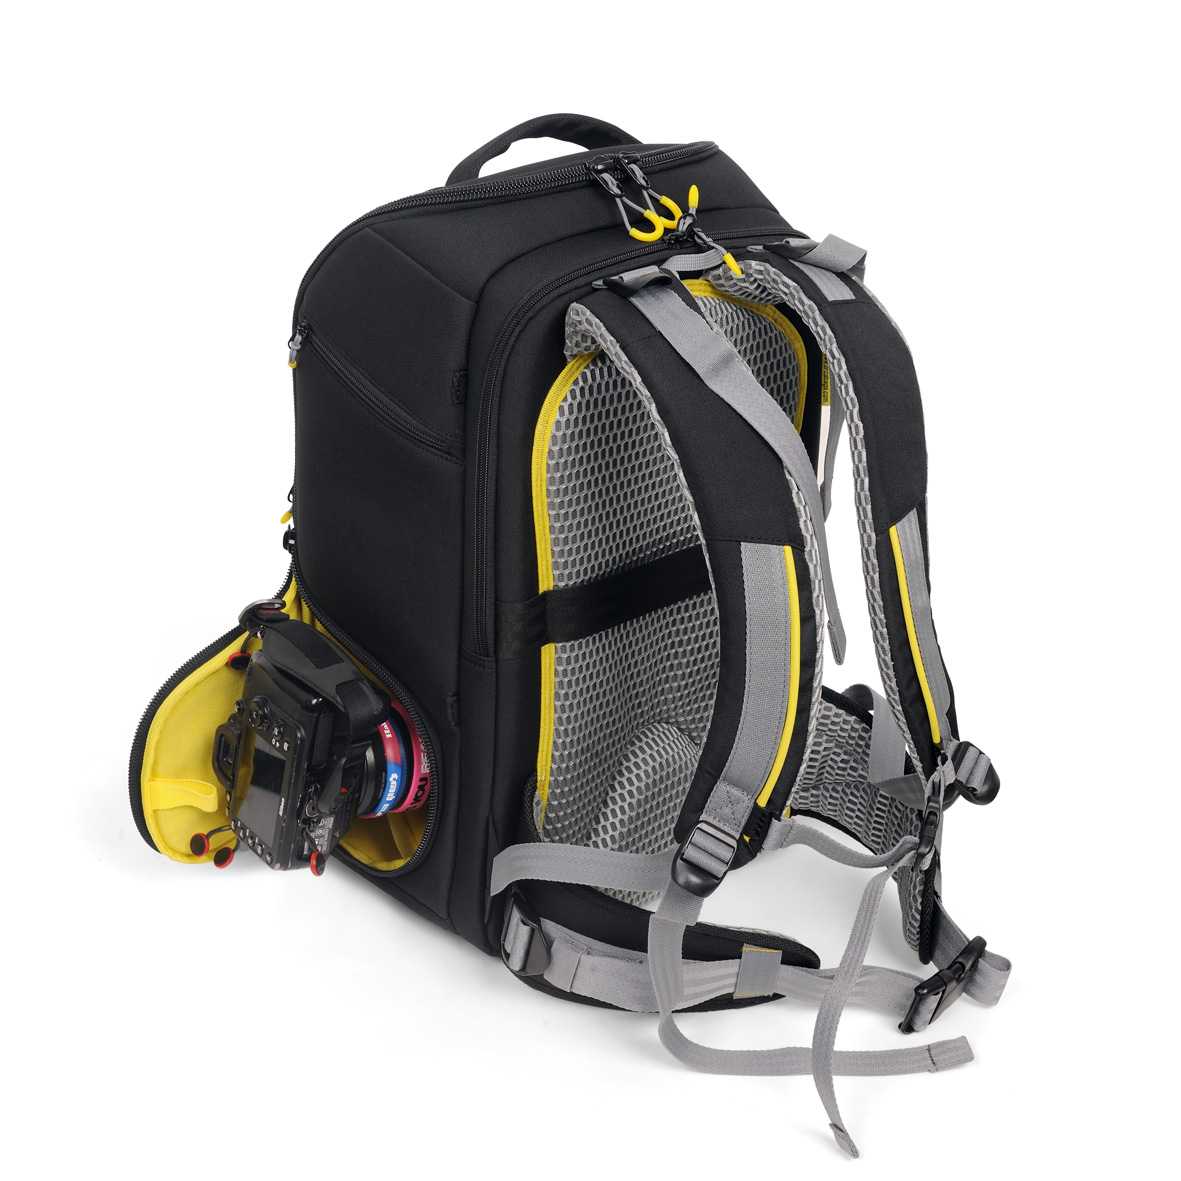 ORCA OR-536 DSLR-Quick Draw Backpack for Mirrorless and DSLR Cameras